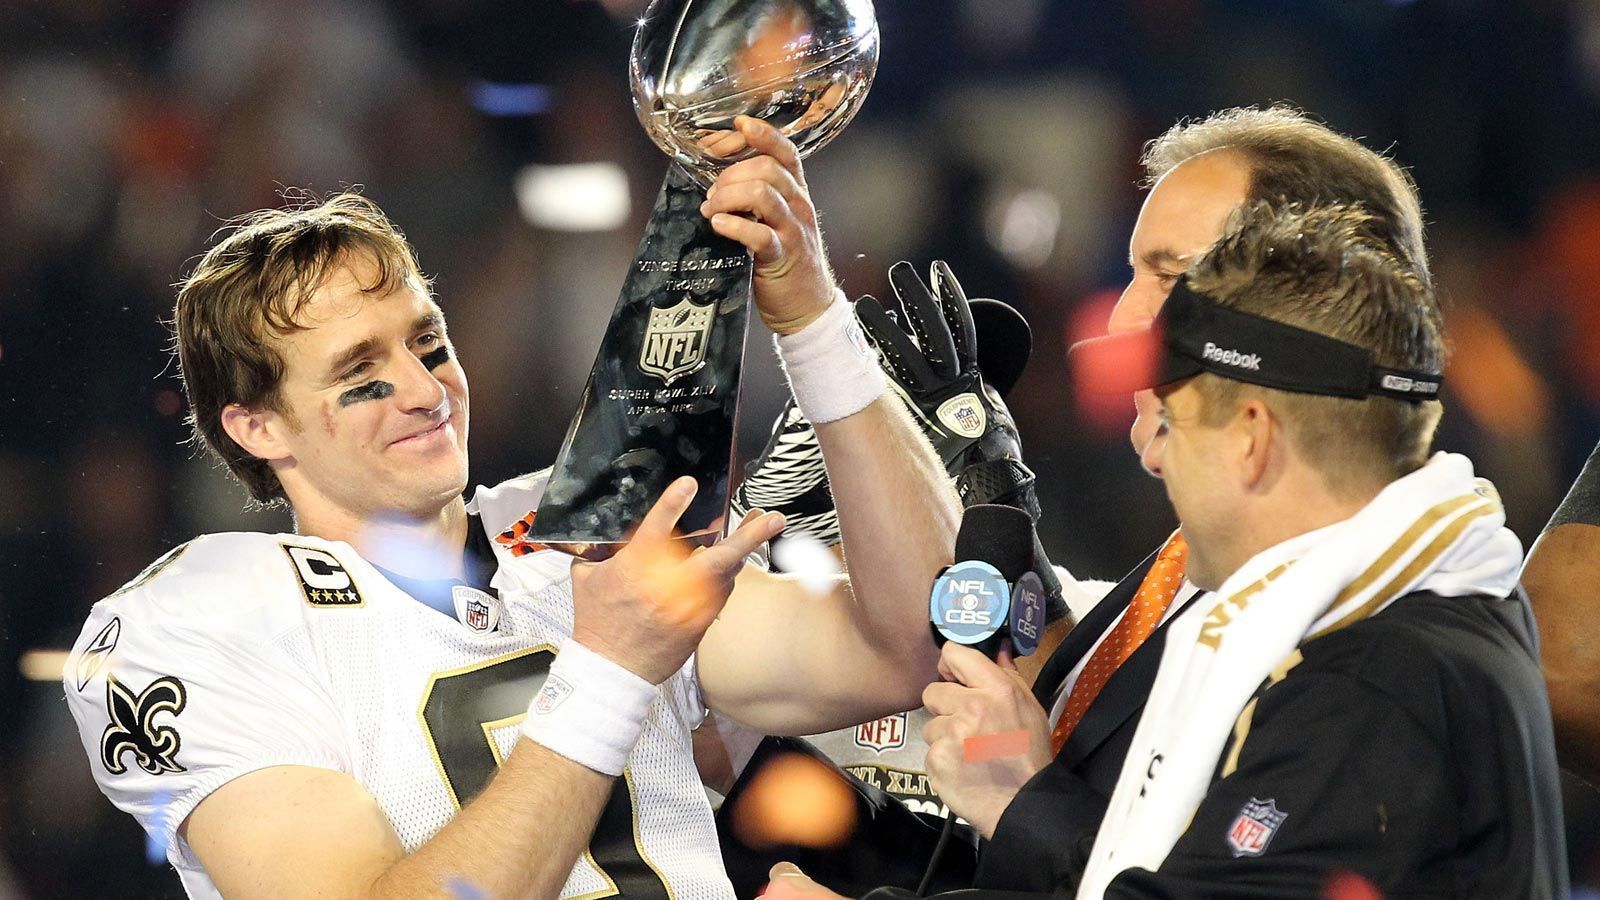 
                <strong>Super Bowl XLIV (2010): New Orleans Saints - Indianapolis Colts 31:17</strong><br>
                Drew Brees (links; New Orleans Saints) und Curtis Painter (Indianapolis Colts).
              